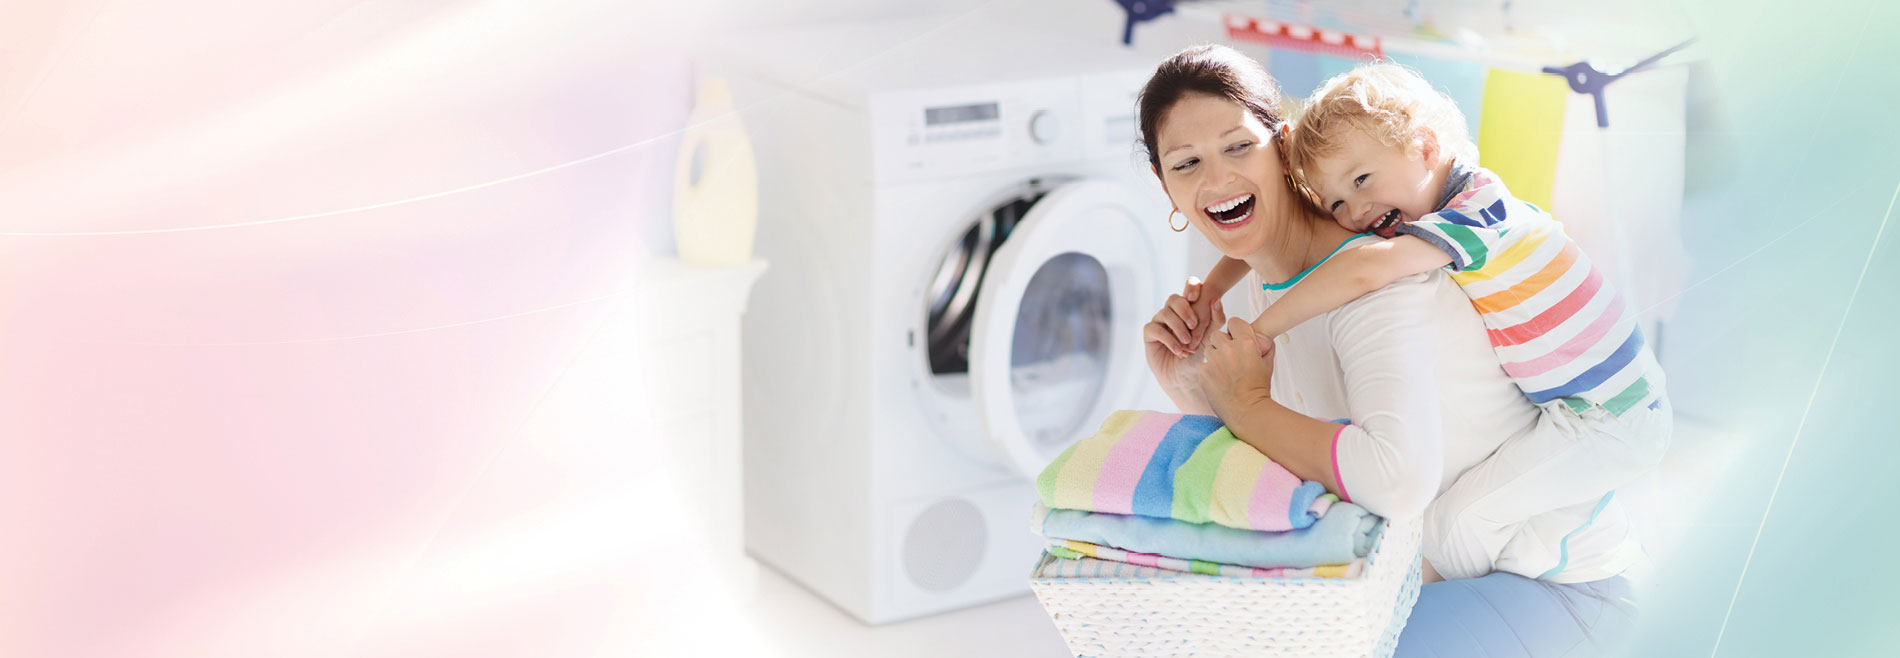 Home - Industrial Laundry Equipments Sparkle Solutions - Commercial Laundry Equipment